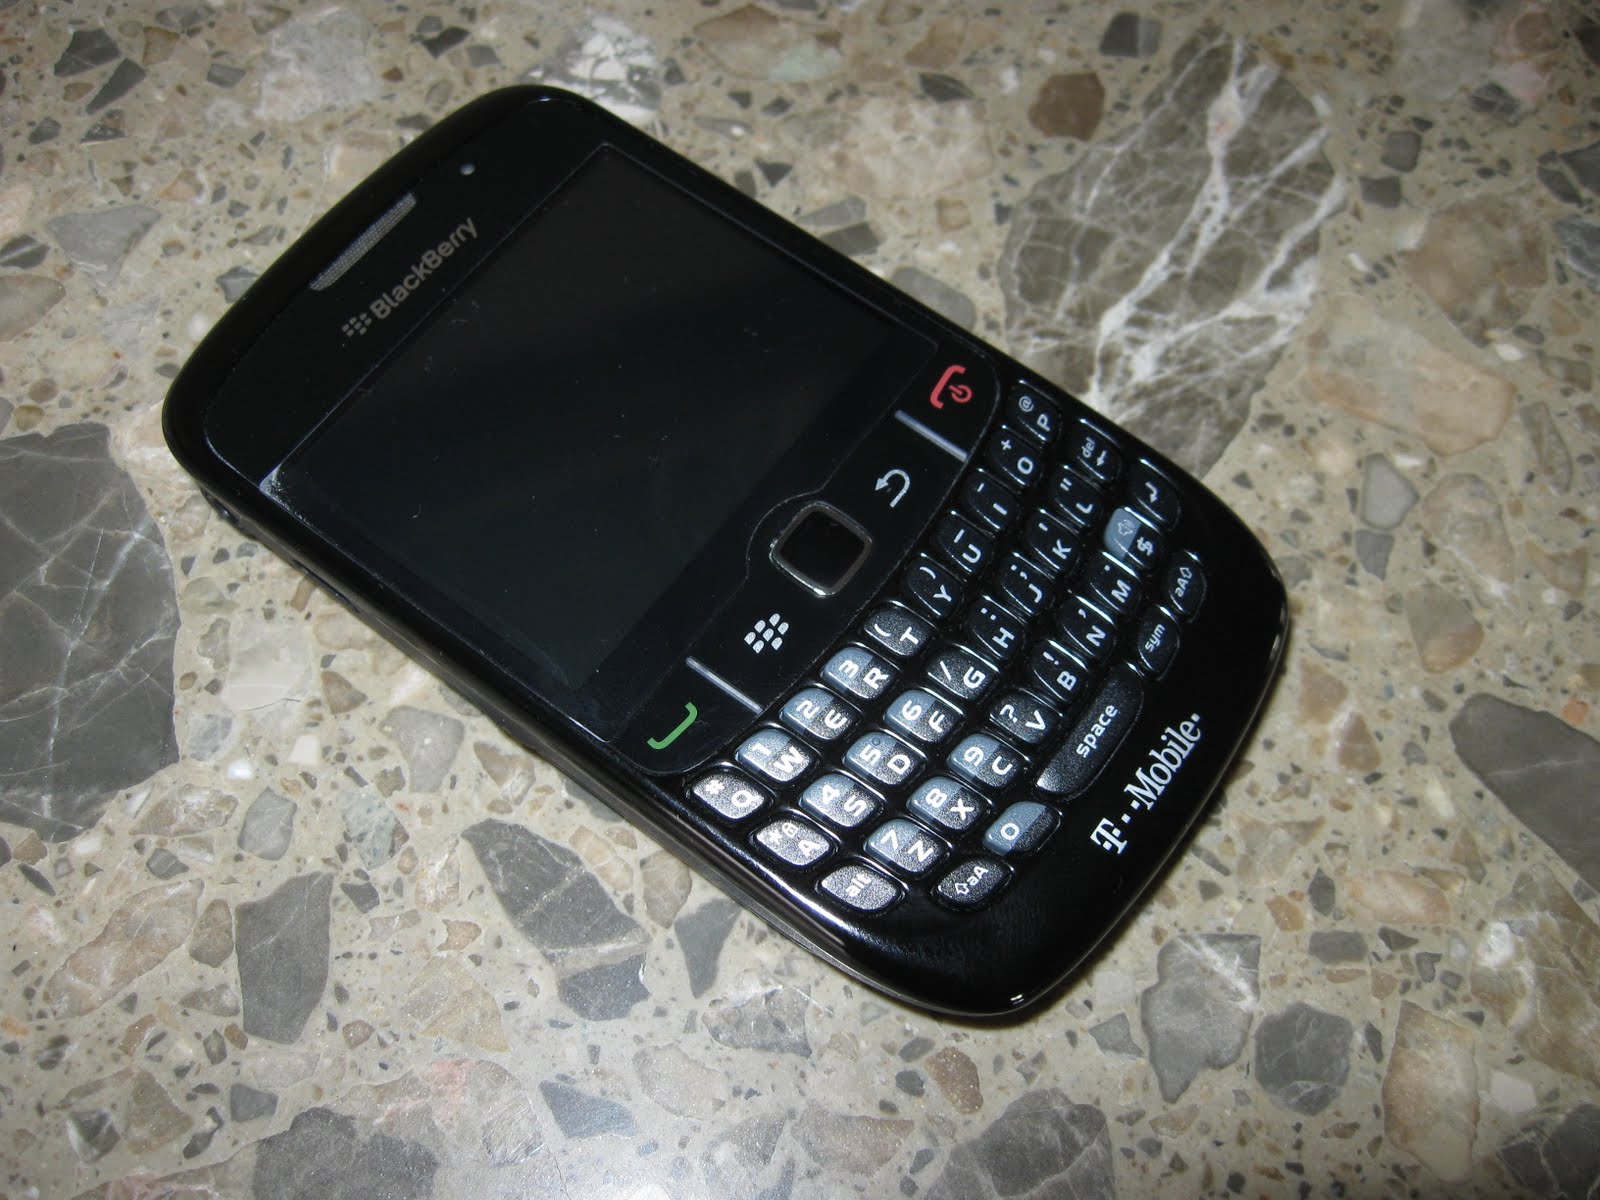 The Blackberry Curve 8520 is